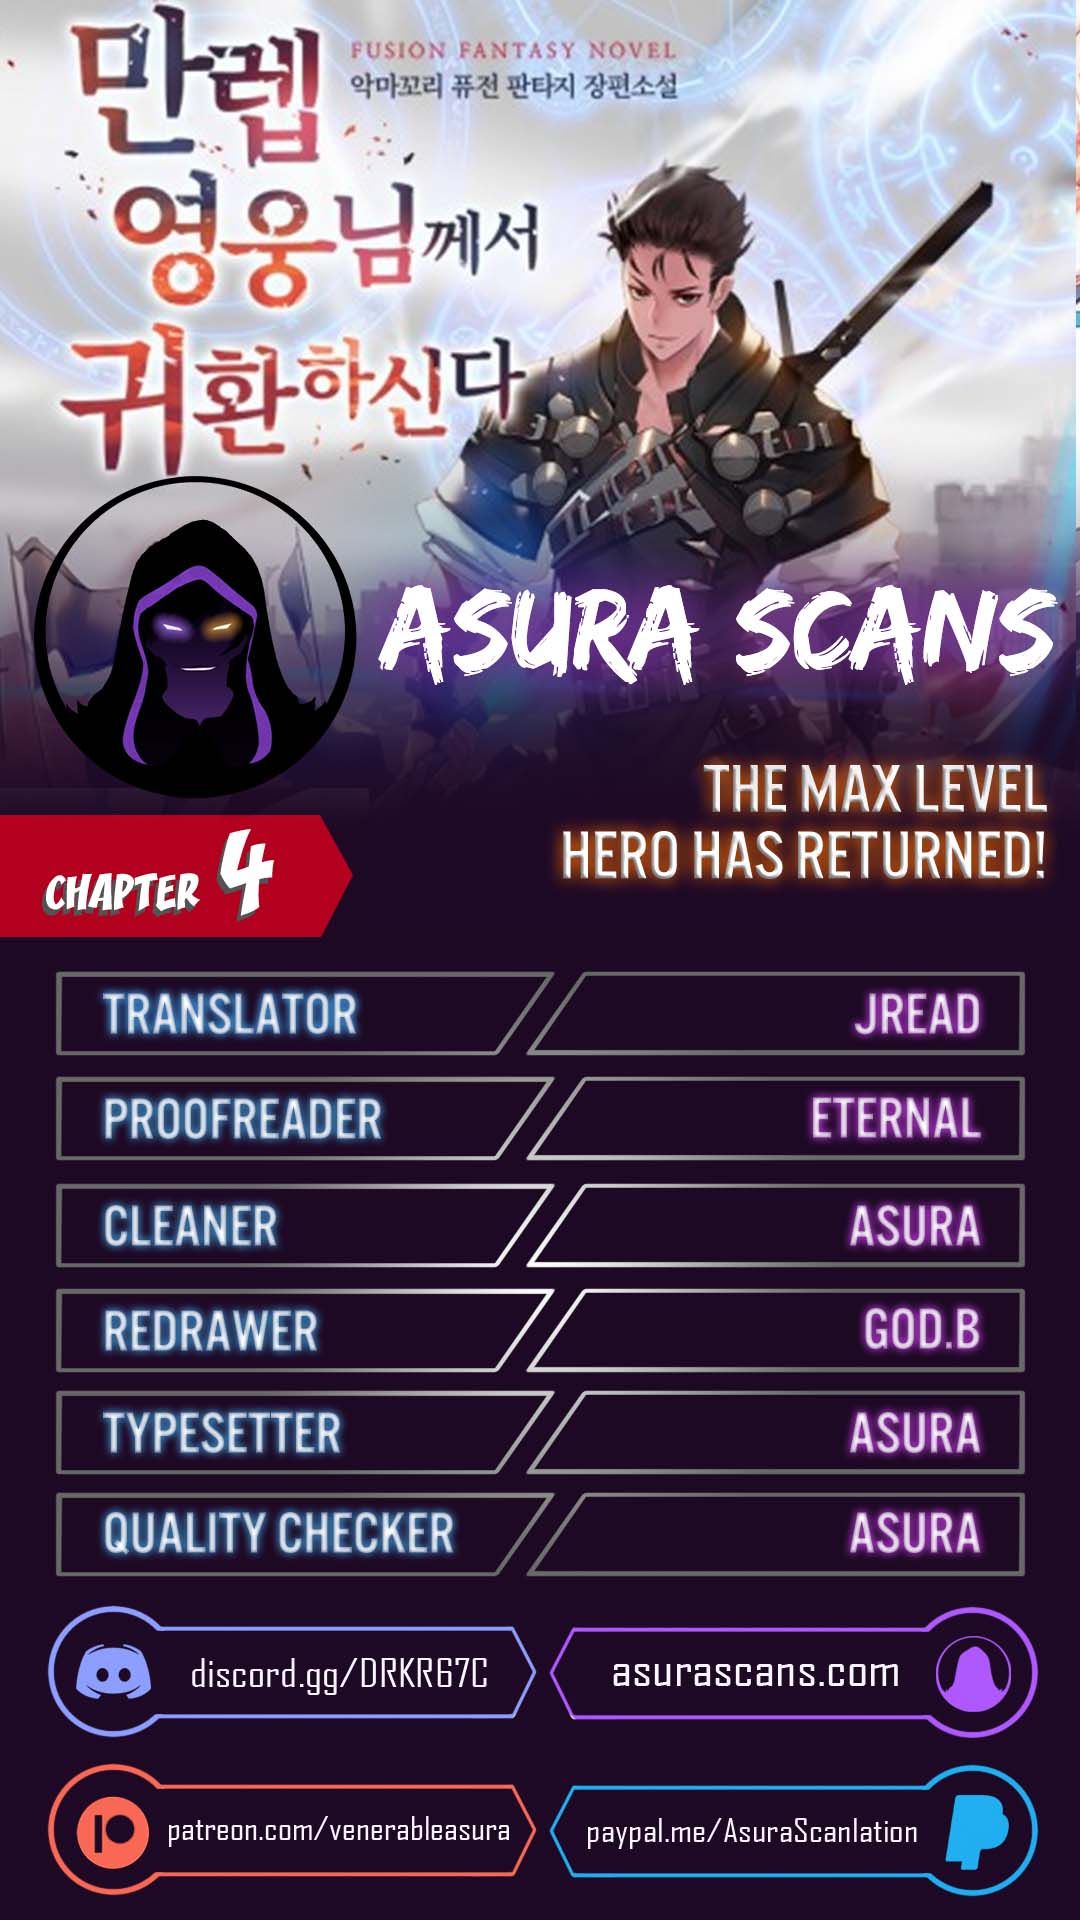 The Max Level Hero has Returned! chapter 4